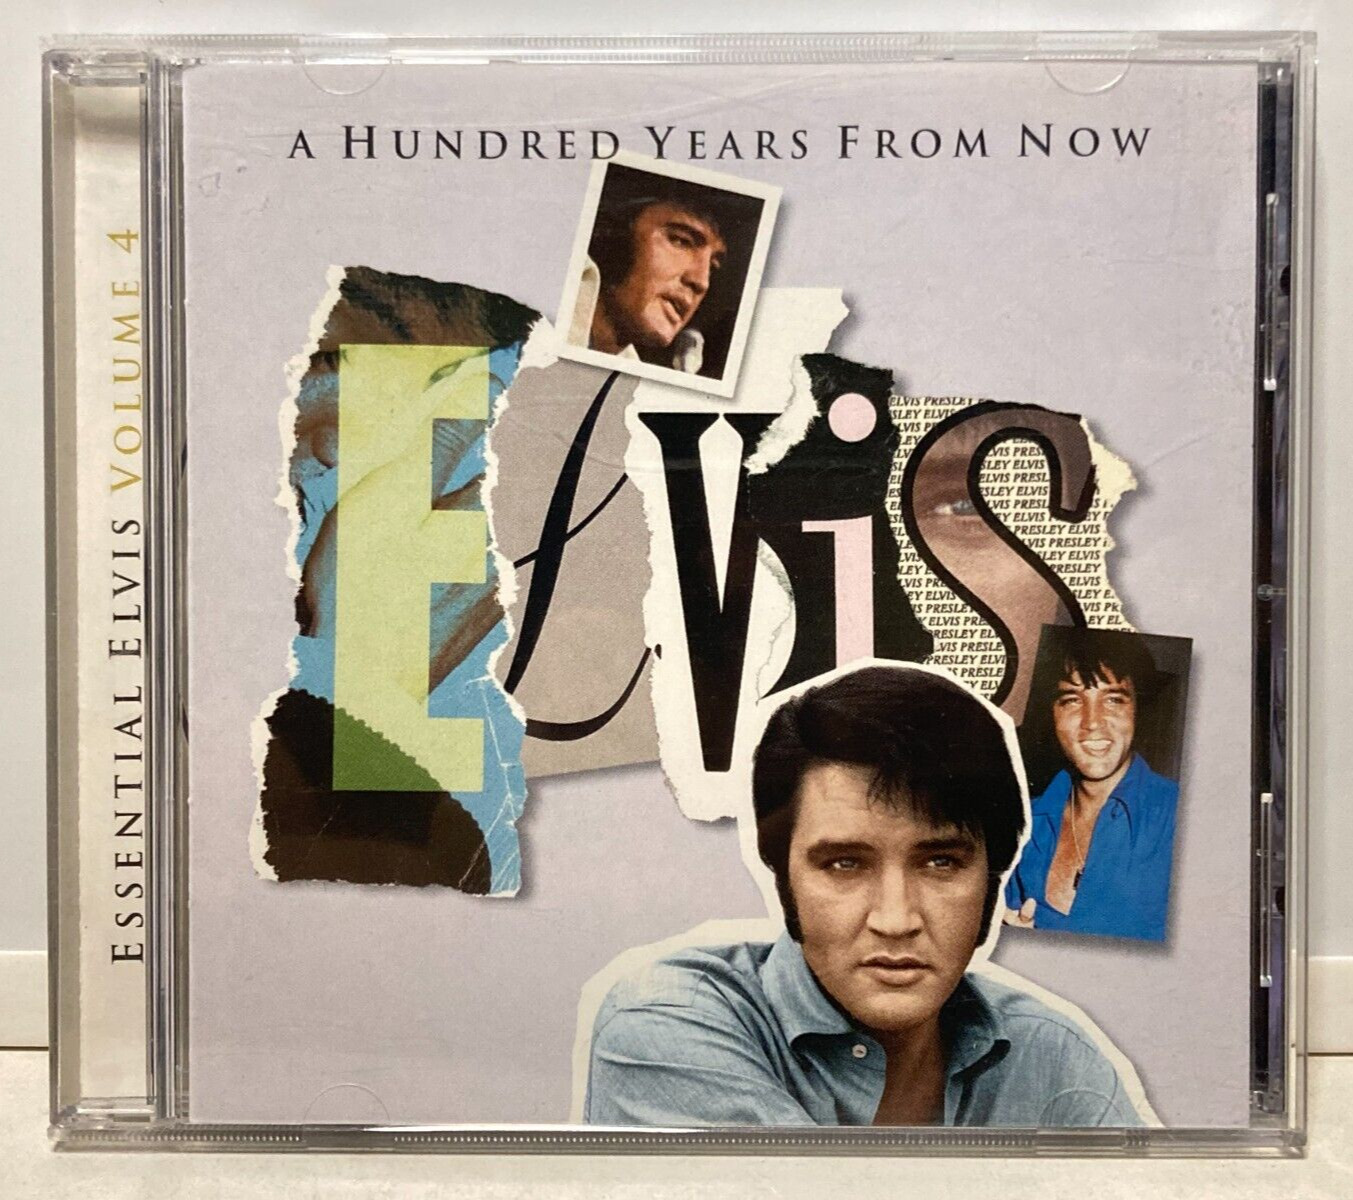 A Hundred Years From Now Essential Elvis Vol 4 Elvis Presley Audio CD, 22 Tracks